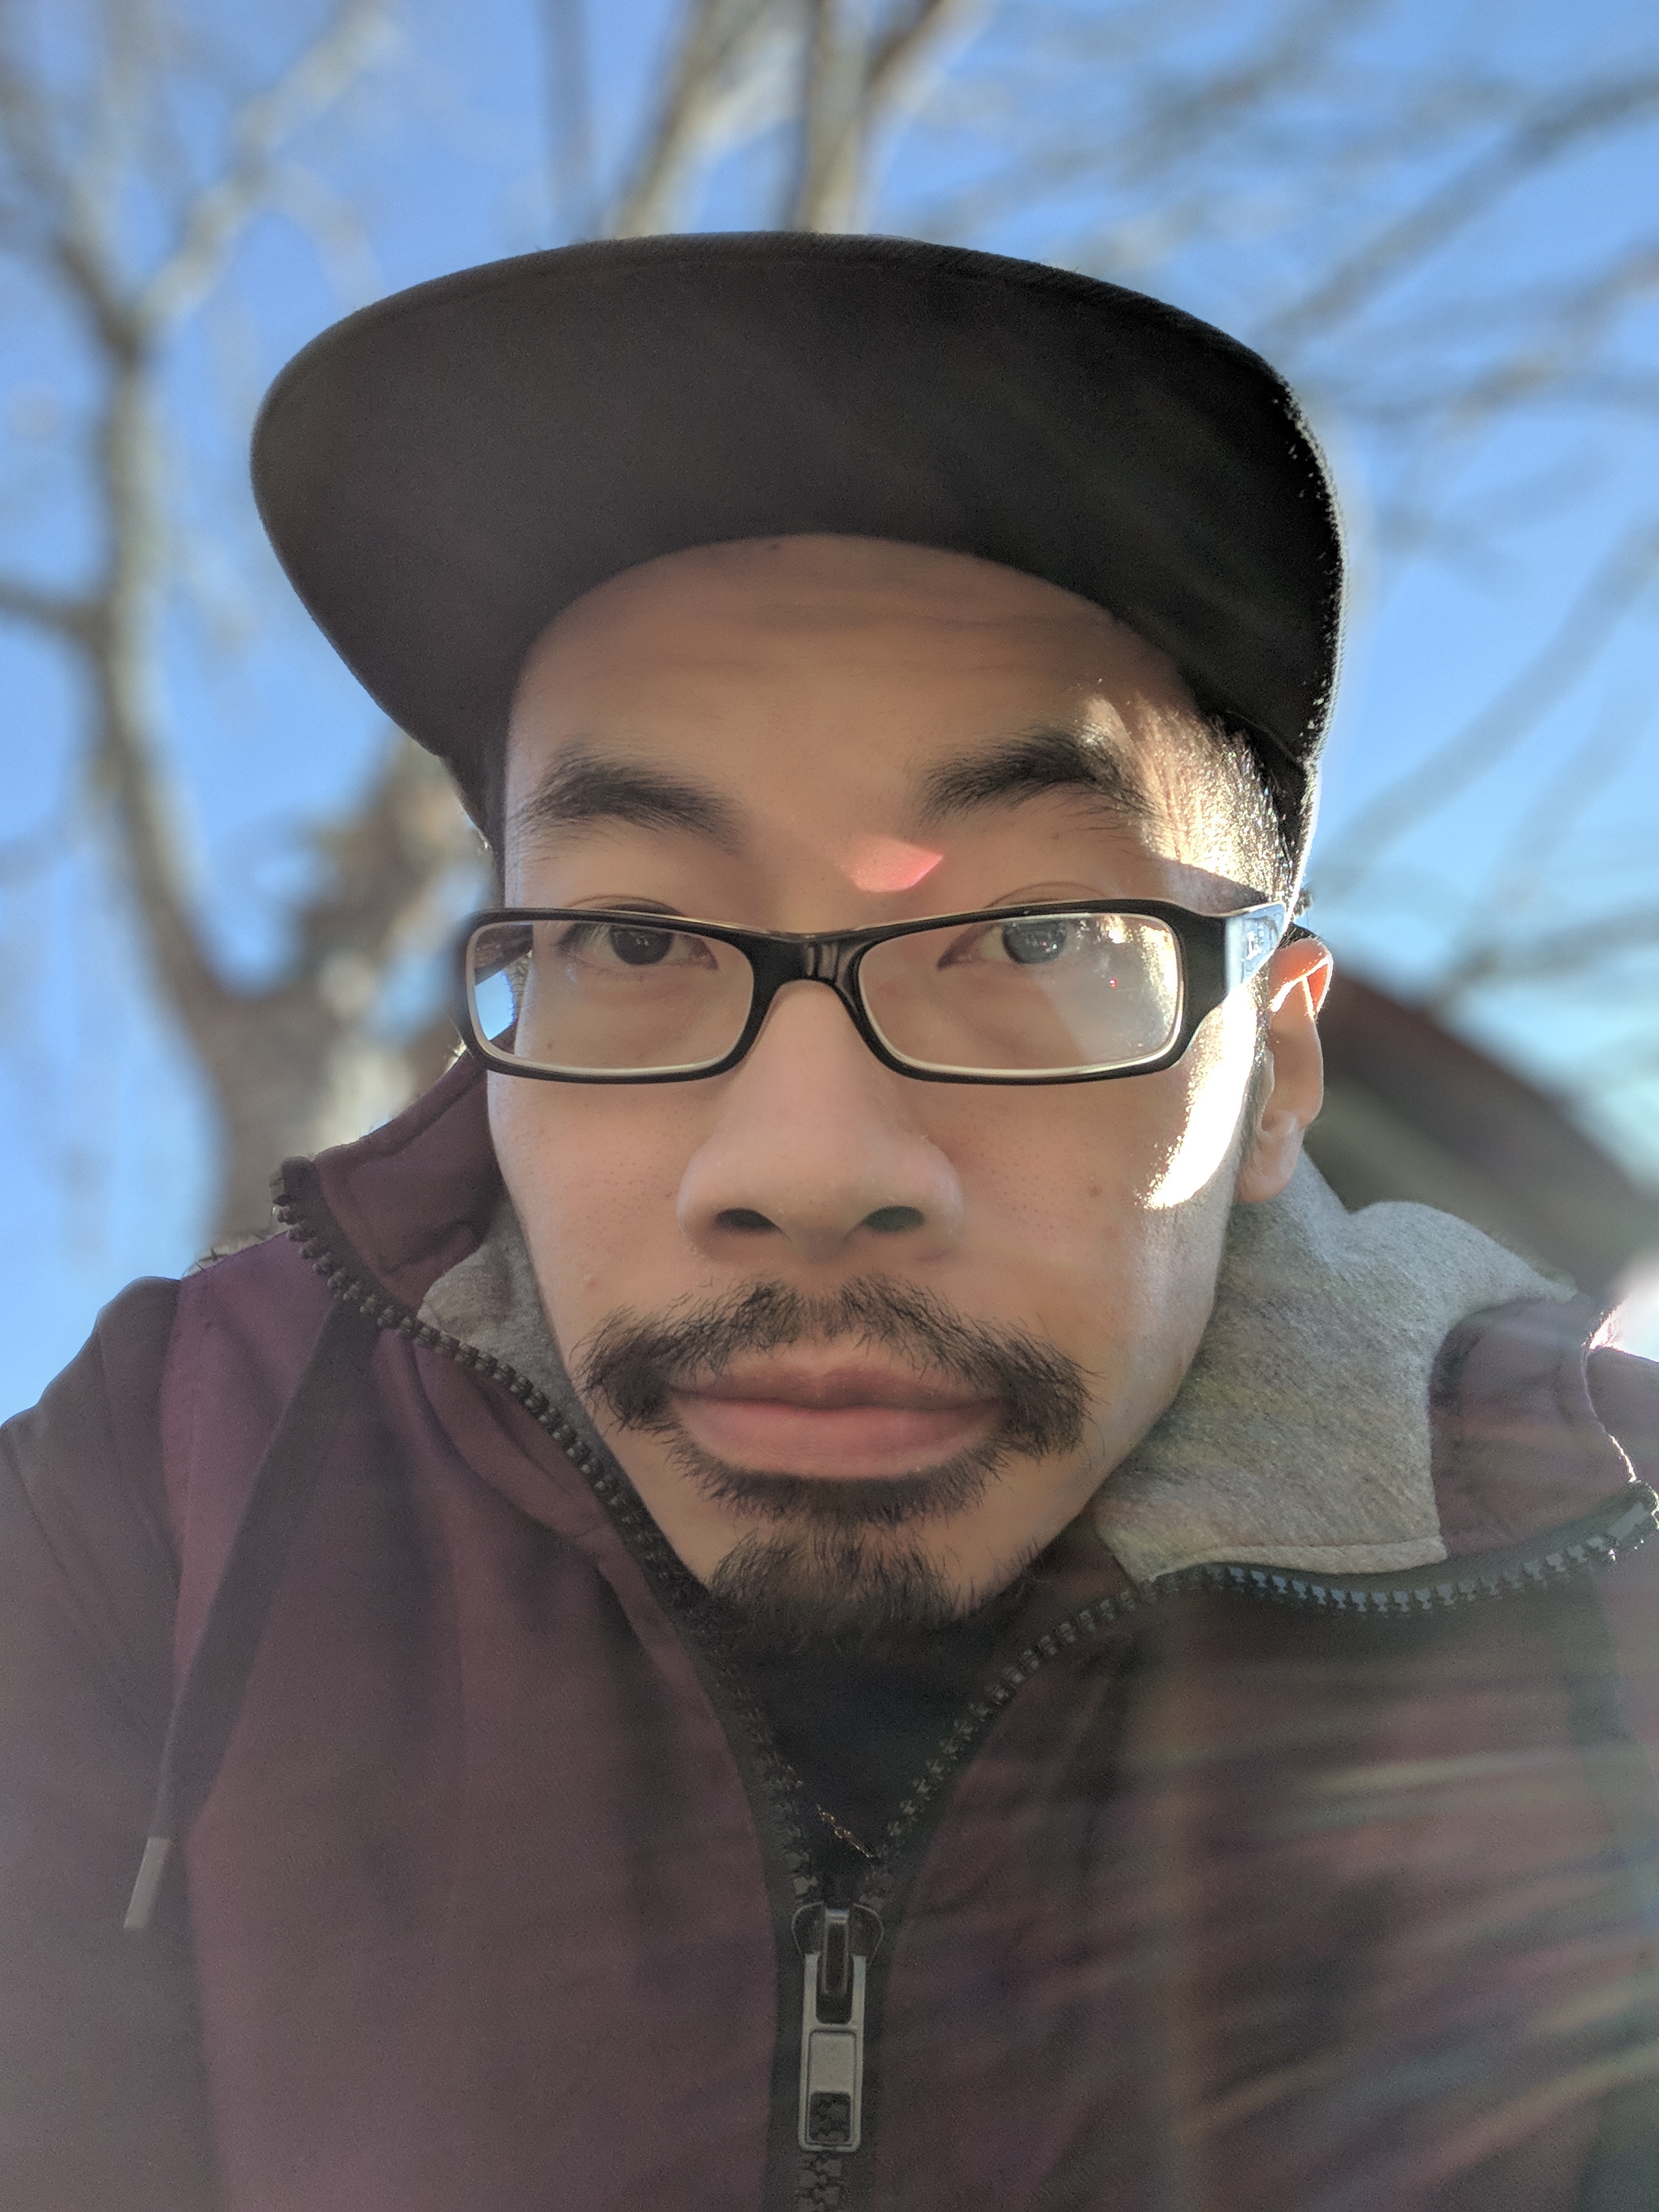 Pixel 2 portrait mode: how does it compare to other phones ...